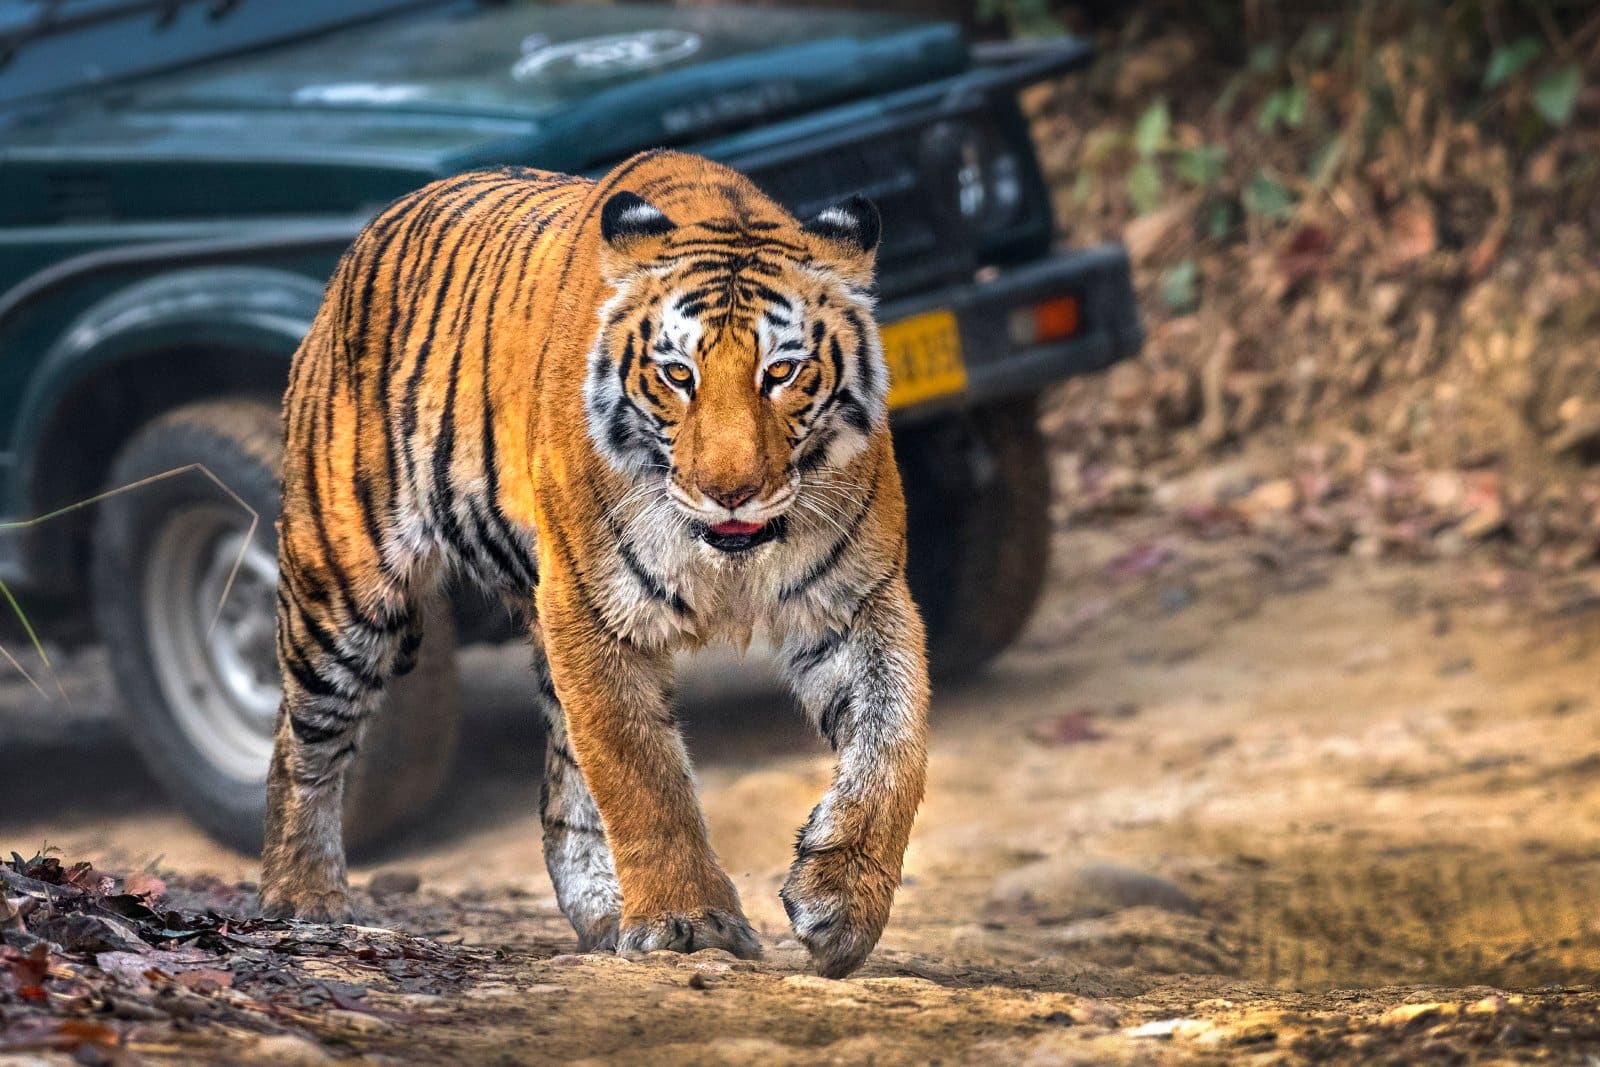 <p class="wp-caption-text">Image Credit: Shutterstock / Rajat Bhandari</p>  <p><span>Established in 1936 as India’s first national park, Jim Corbett National Park is named after the legendary British hunter-turned-conservationist. Nestled in the foothills of the Himalayas, it’s known for its significant population of Bengal tigers, along with elephants, leopards, and hundreds of bird species. The park’s diverse landscapes offer rich wildlife viewing opportunities, including dense forests, grasslands, and river habitats. Jeep safaris and elephant rides allow visitors to explore the park’s beauty and inhabitants.</span></p>